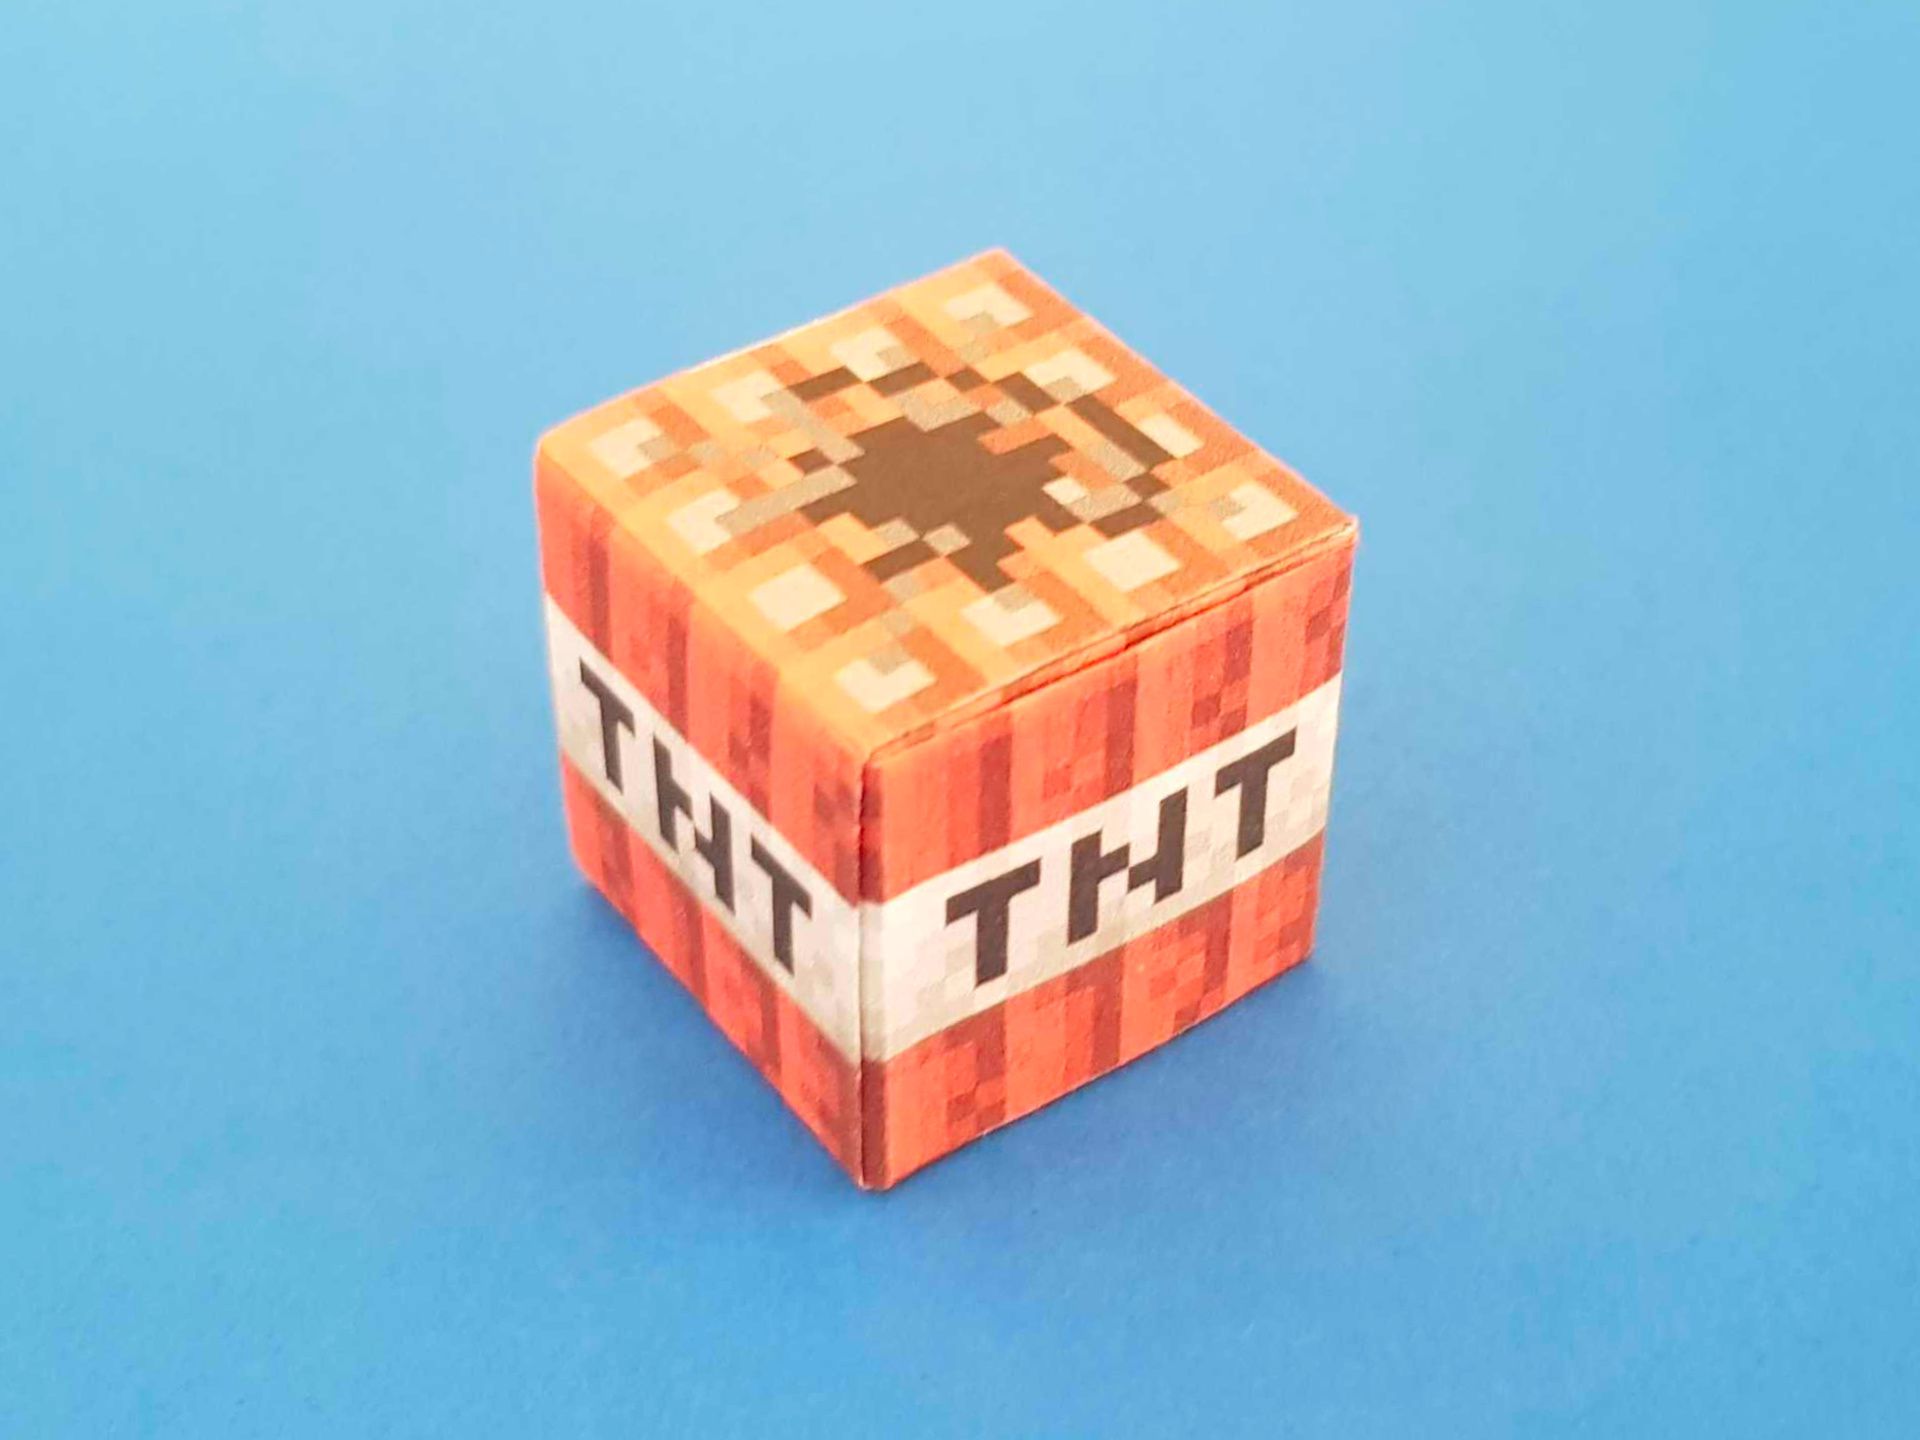 Origami Minecraft redwood wood block texture and template